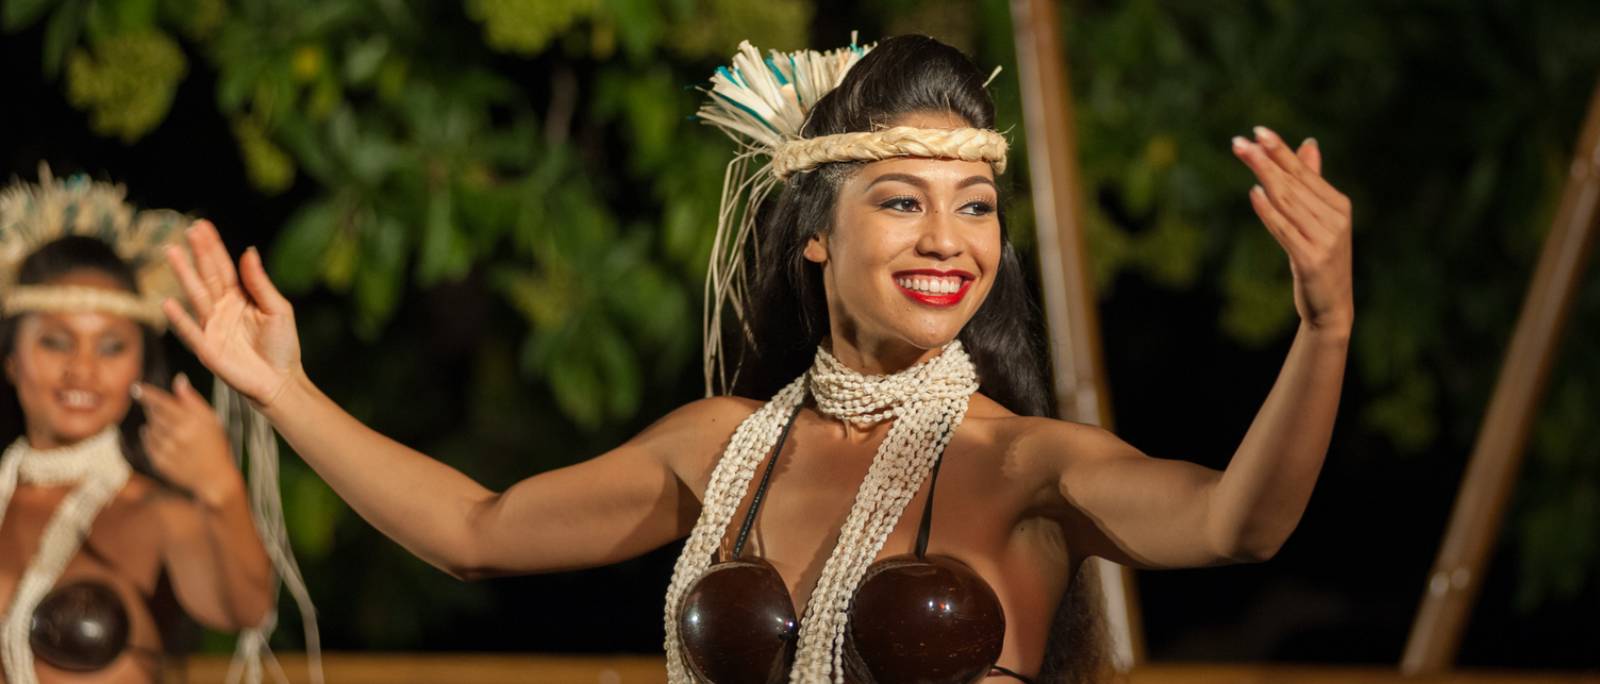 Woman with hula outfit smiling